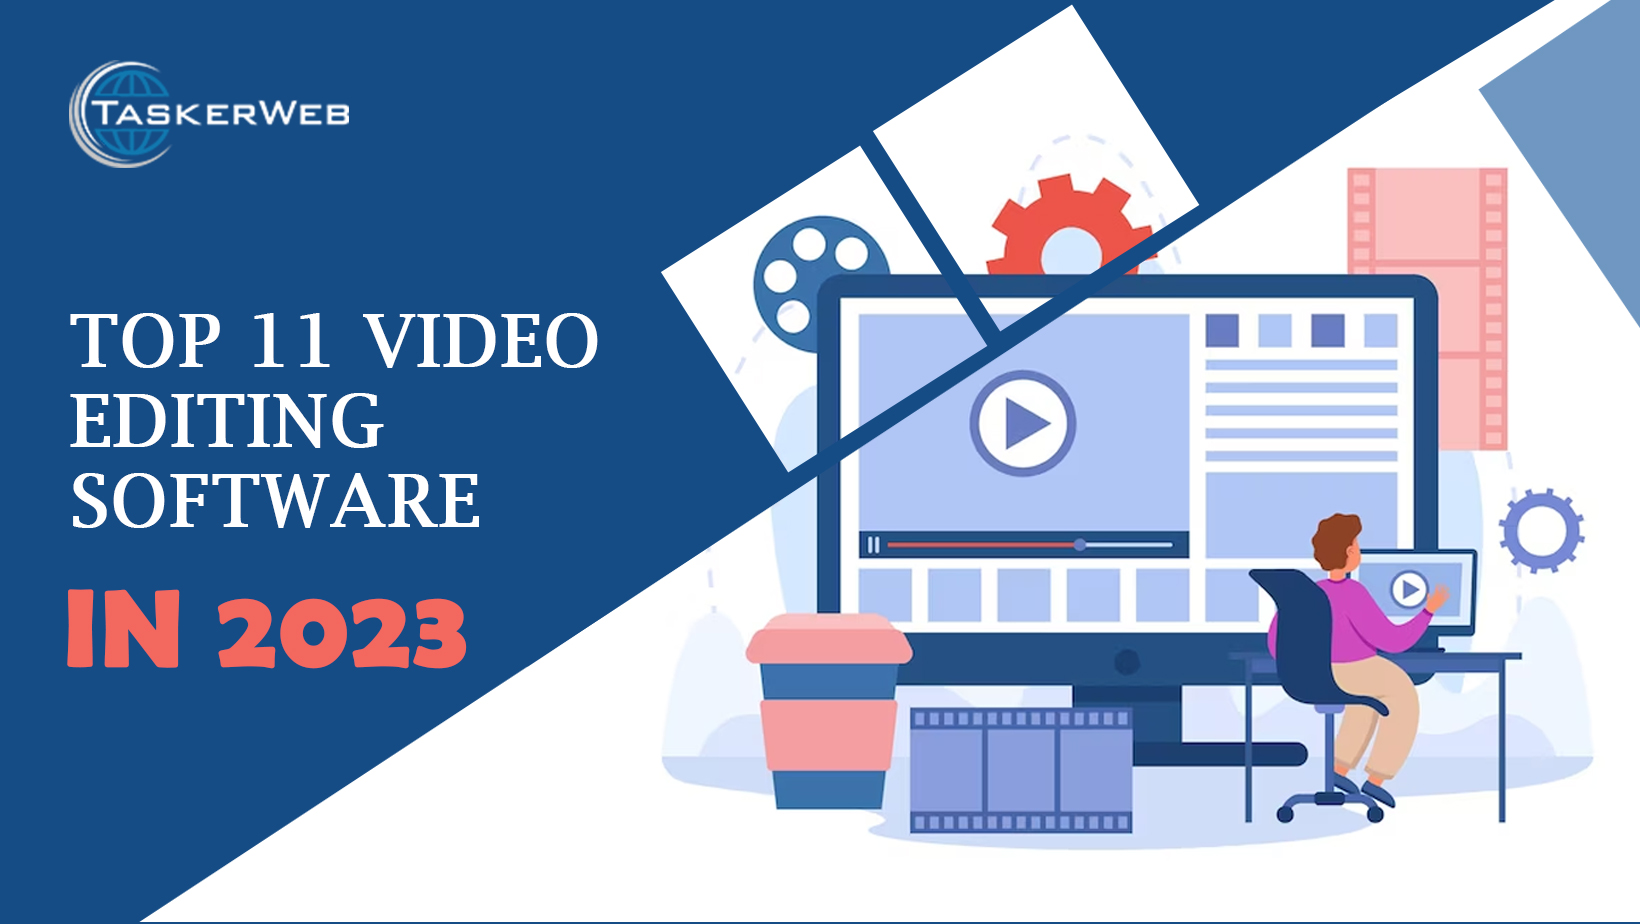  Top 11 Video Editing Software In 2023